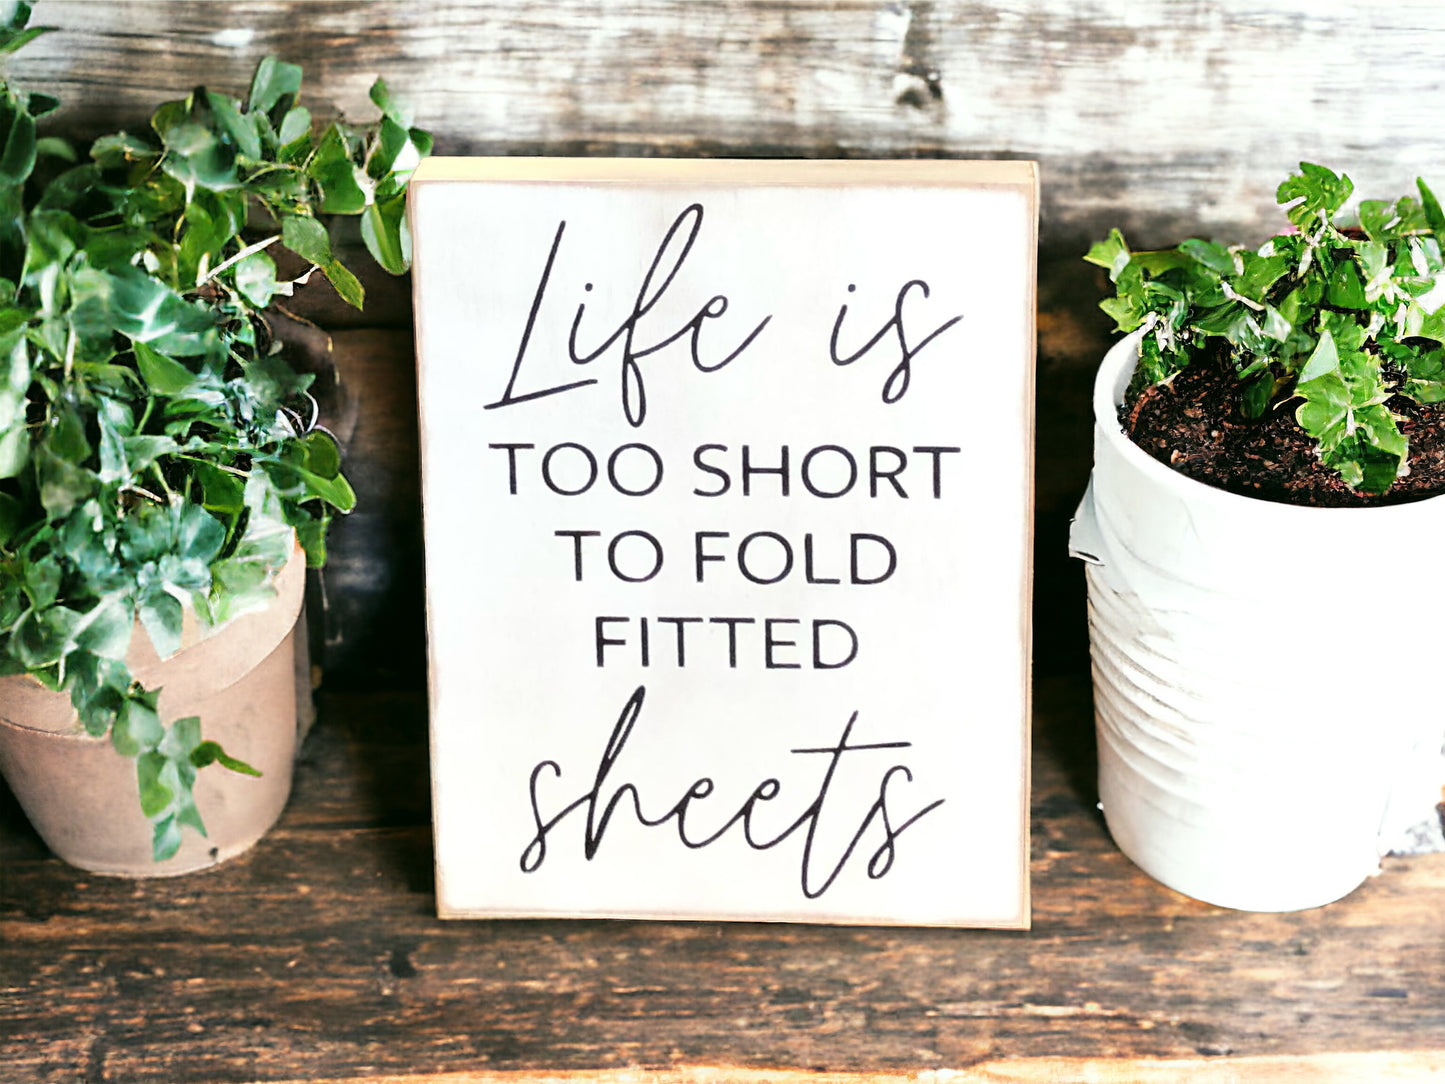 Life is Too Short to Fold Fitted Sheets - Rustic Wood Sign